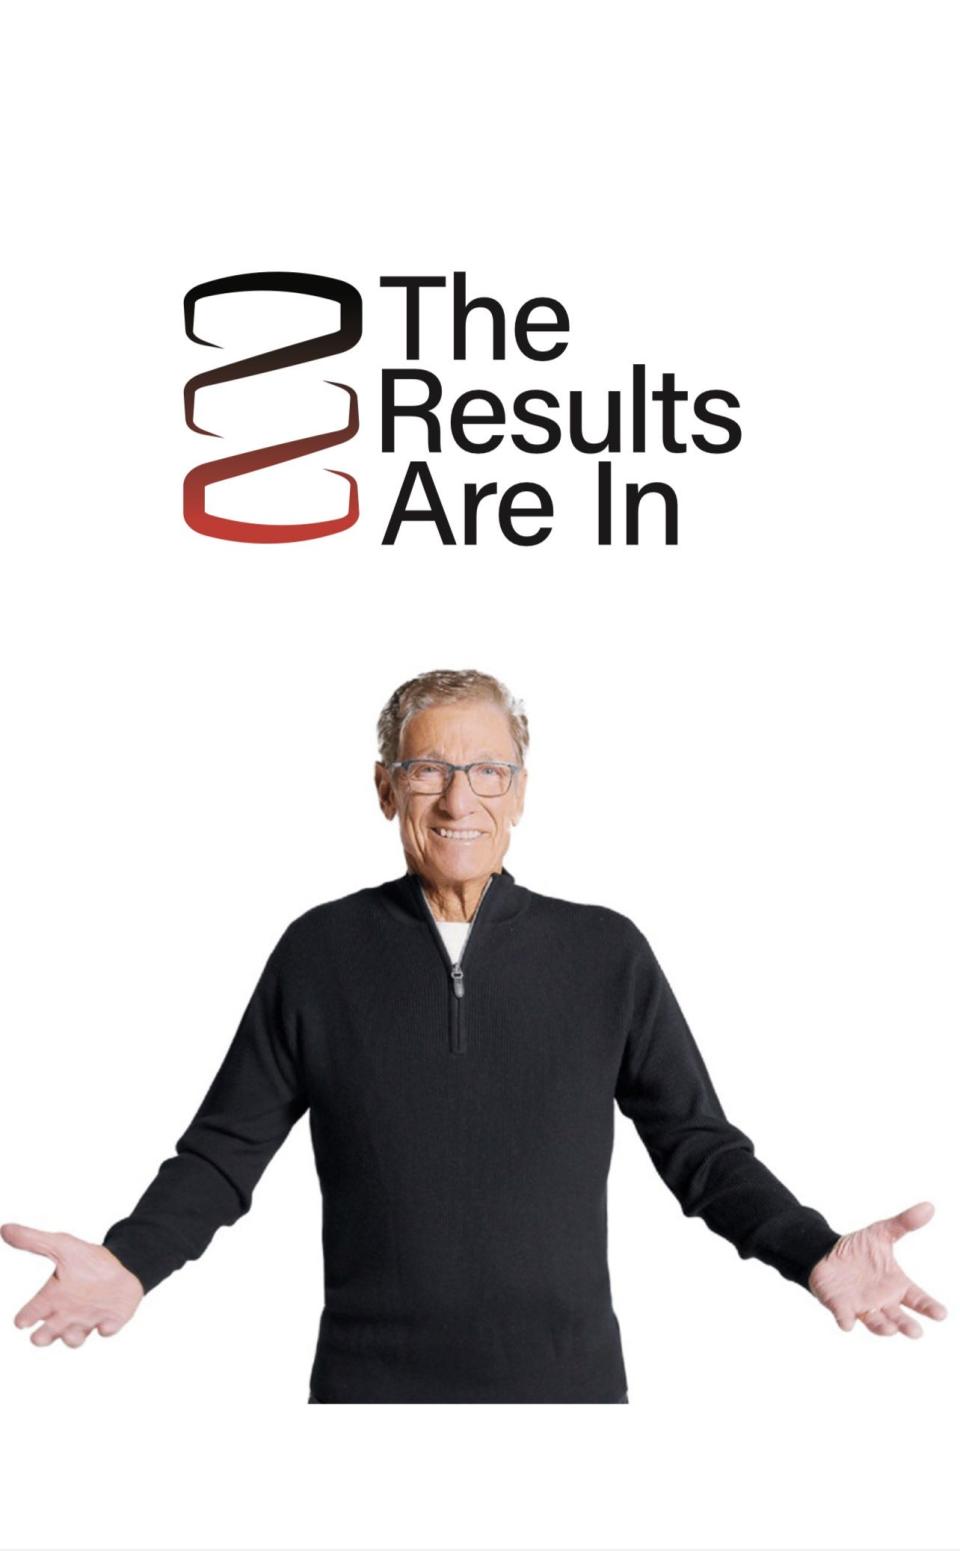 Maury Povich, longtime television show host, announced in June 2023 that he has partnered with DNA Diagnostics Center to launch an at-home DNA testing kit called "The Results Are In."